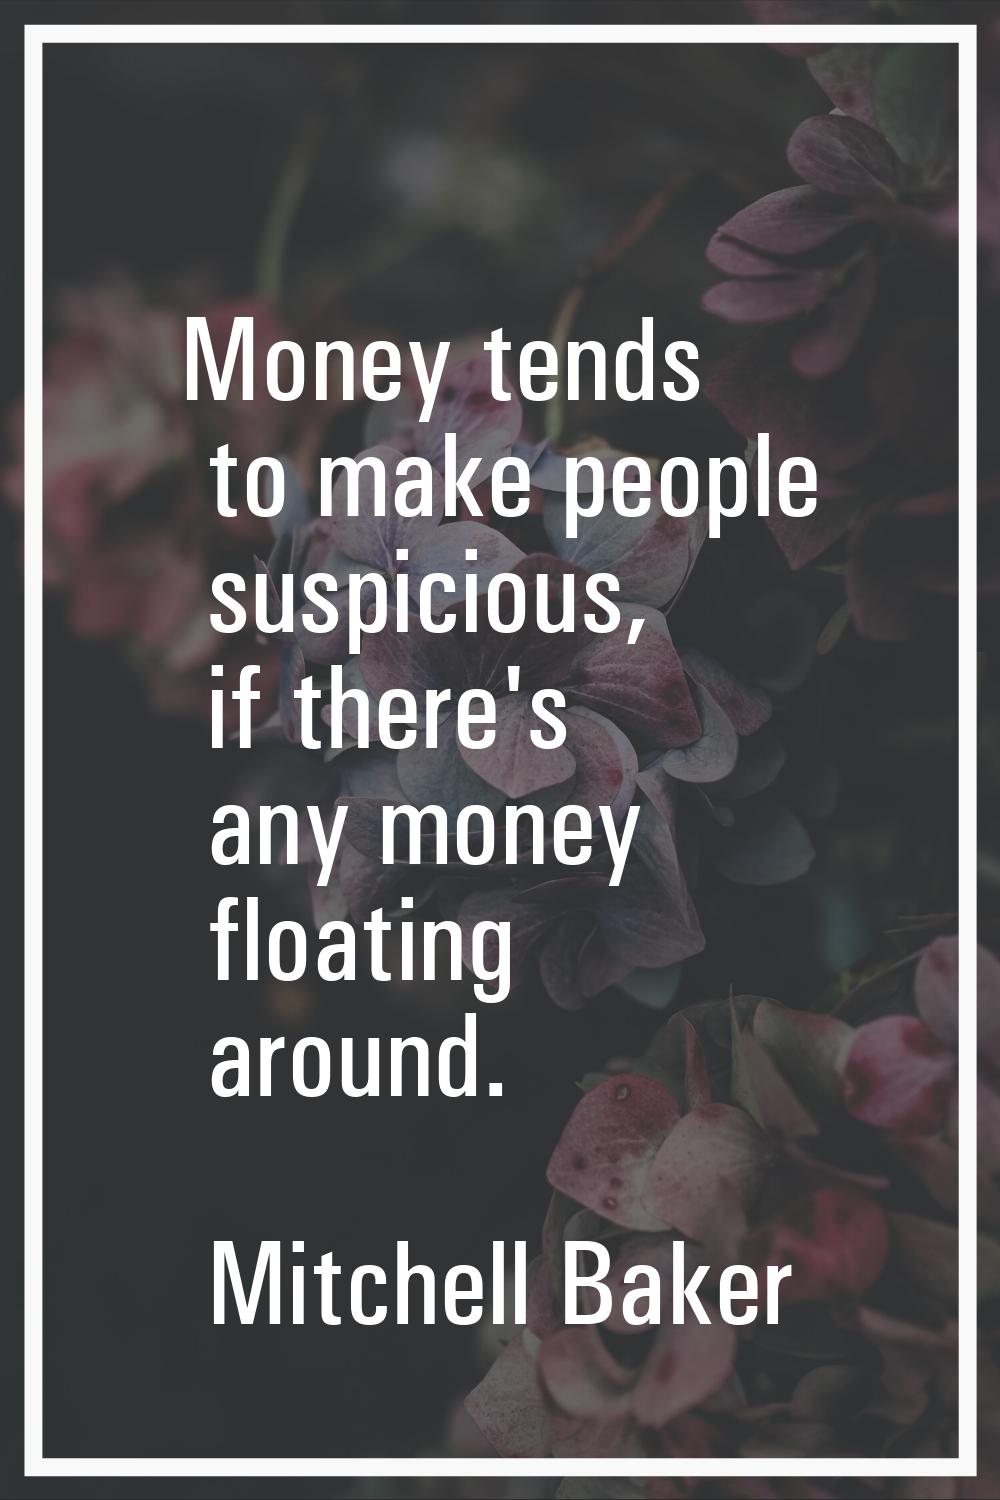 Money tends to make people suspicious, if there's any money floating around.